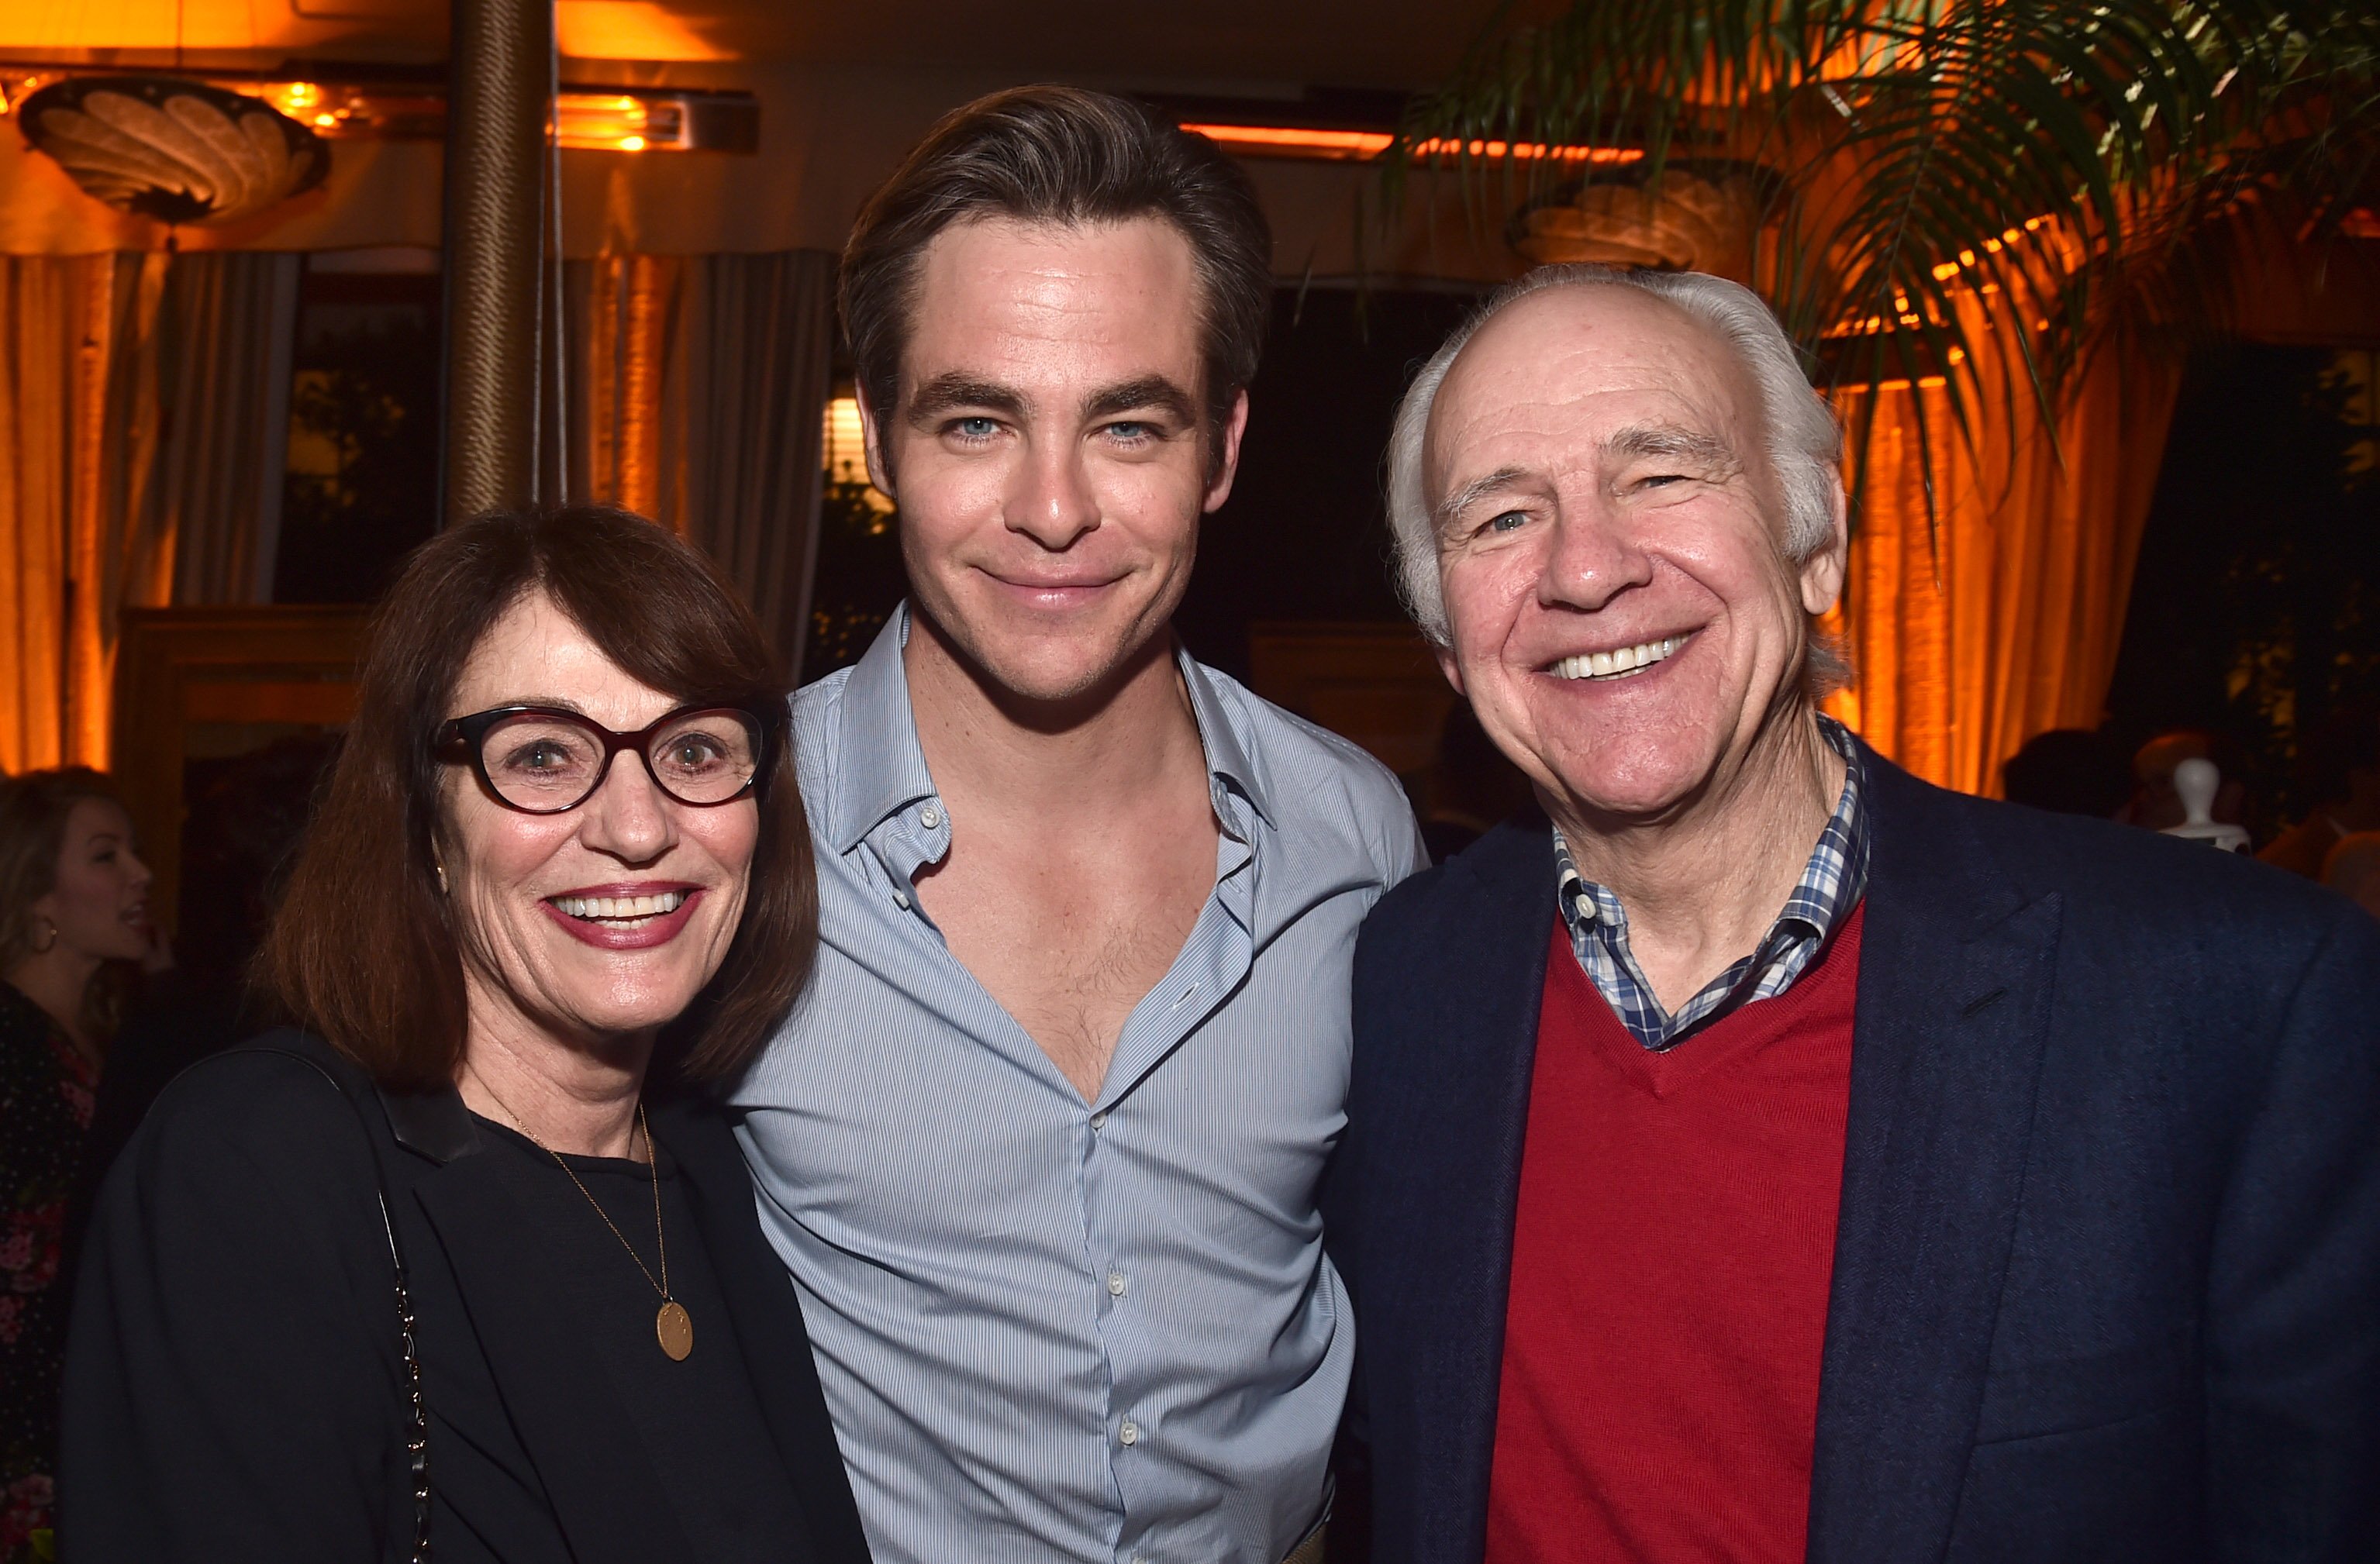 Gwynne Gilford, Chris Pine, and Robert Pine at the after party for the premiere of TNT's "I Am The Night" on January 24, 2019 in Los Angeles, California | Source: Getty Images